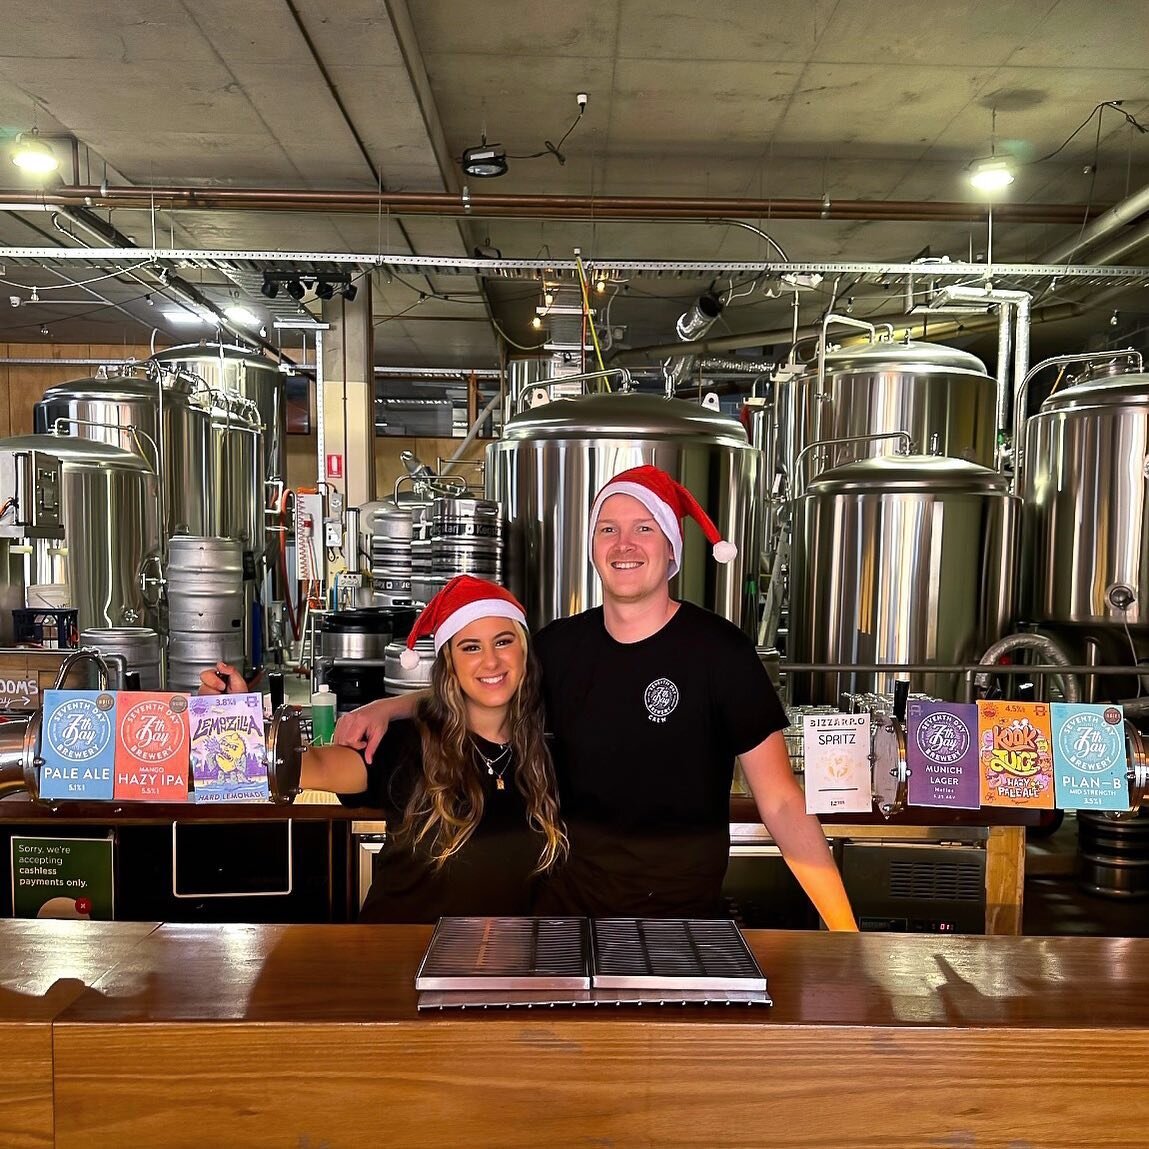 Hop into the holiday spirit with a cold one to celebrate Christmas Eve at your one and only 😍 With a raffle, live music and good times to be had 🍻 See you at your local! 

Cheers and beers, 
The 7th Day gang 🤙